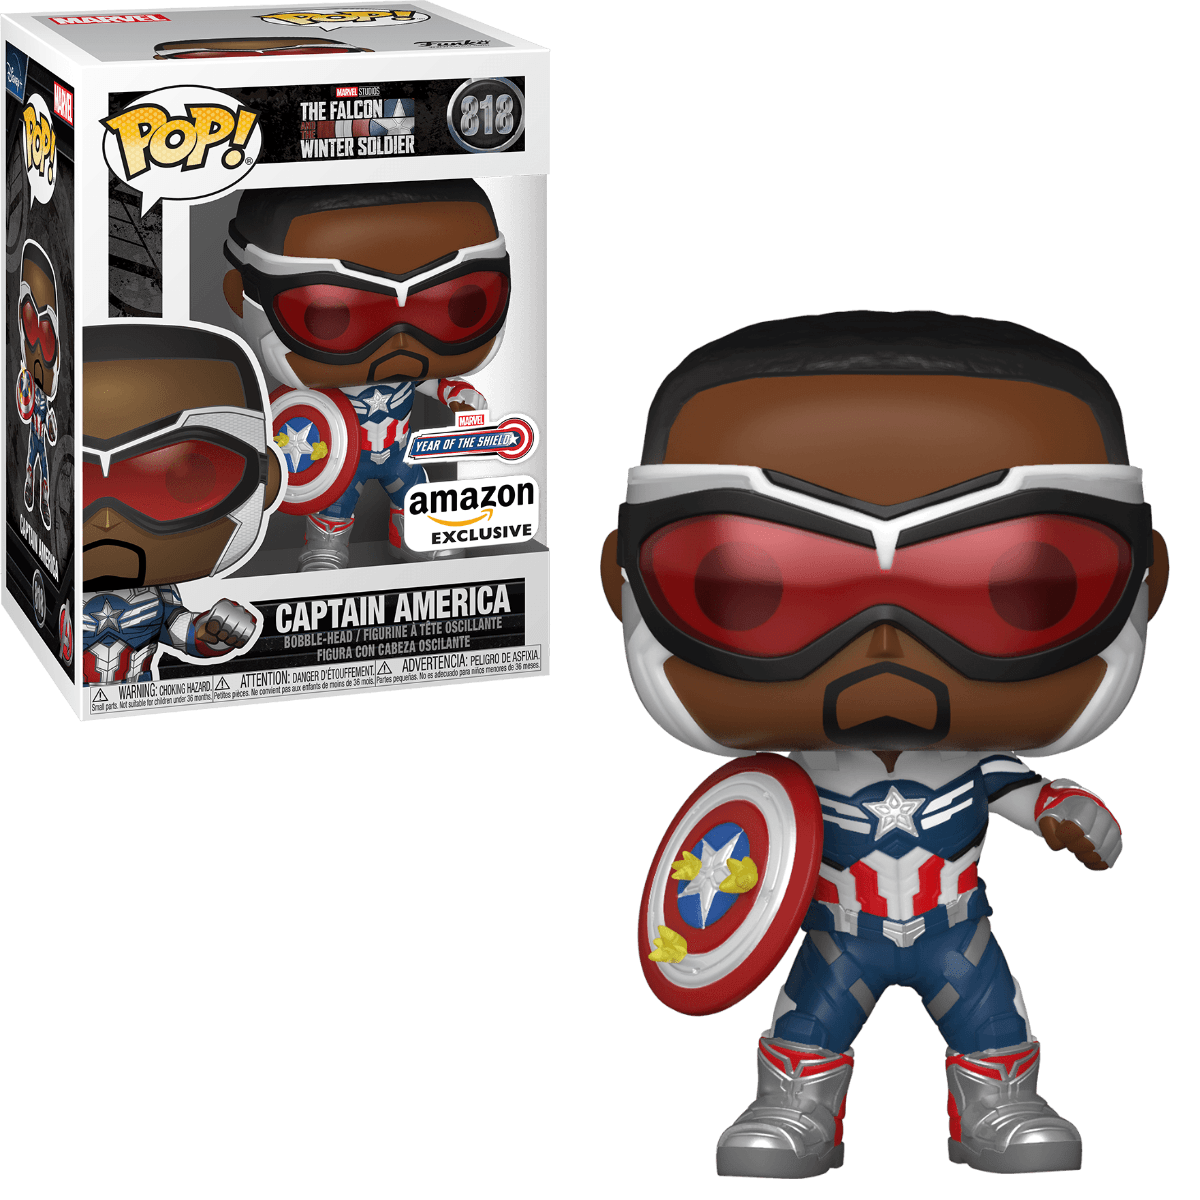 Pop! Marvel - The Falcon And The Winter Soldier - Captain America - #818 - Amazon EXCLUSIVE - Hobby Champion Inc